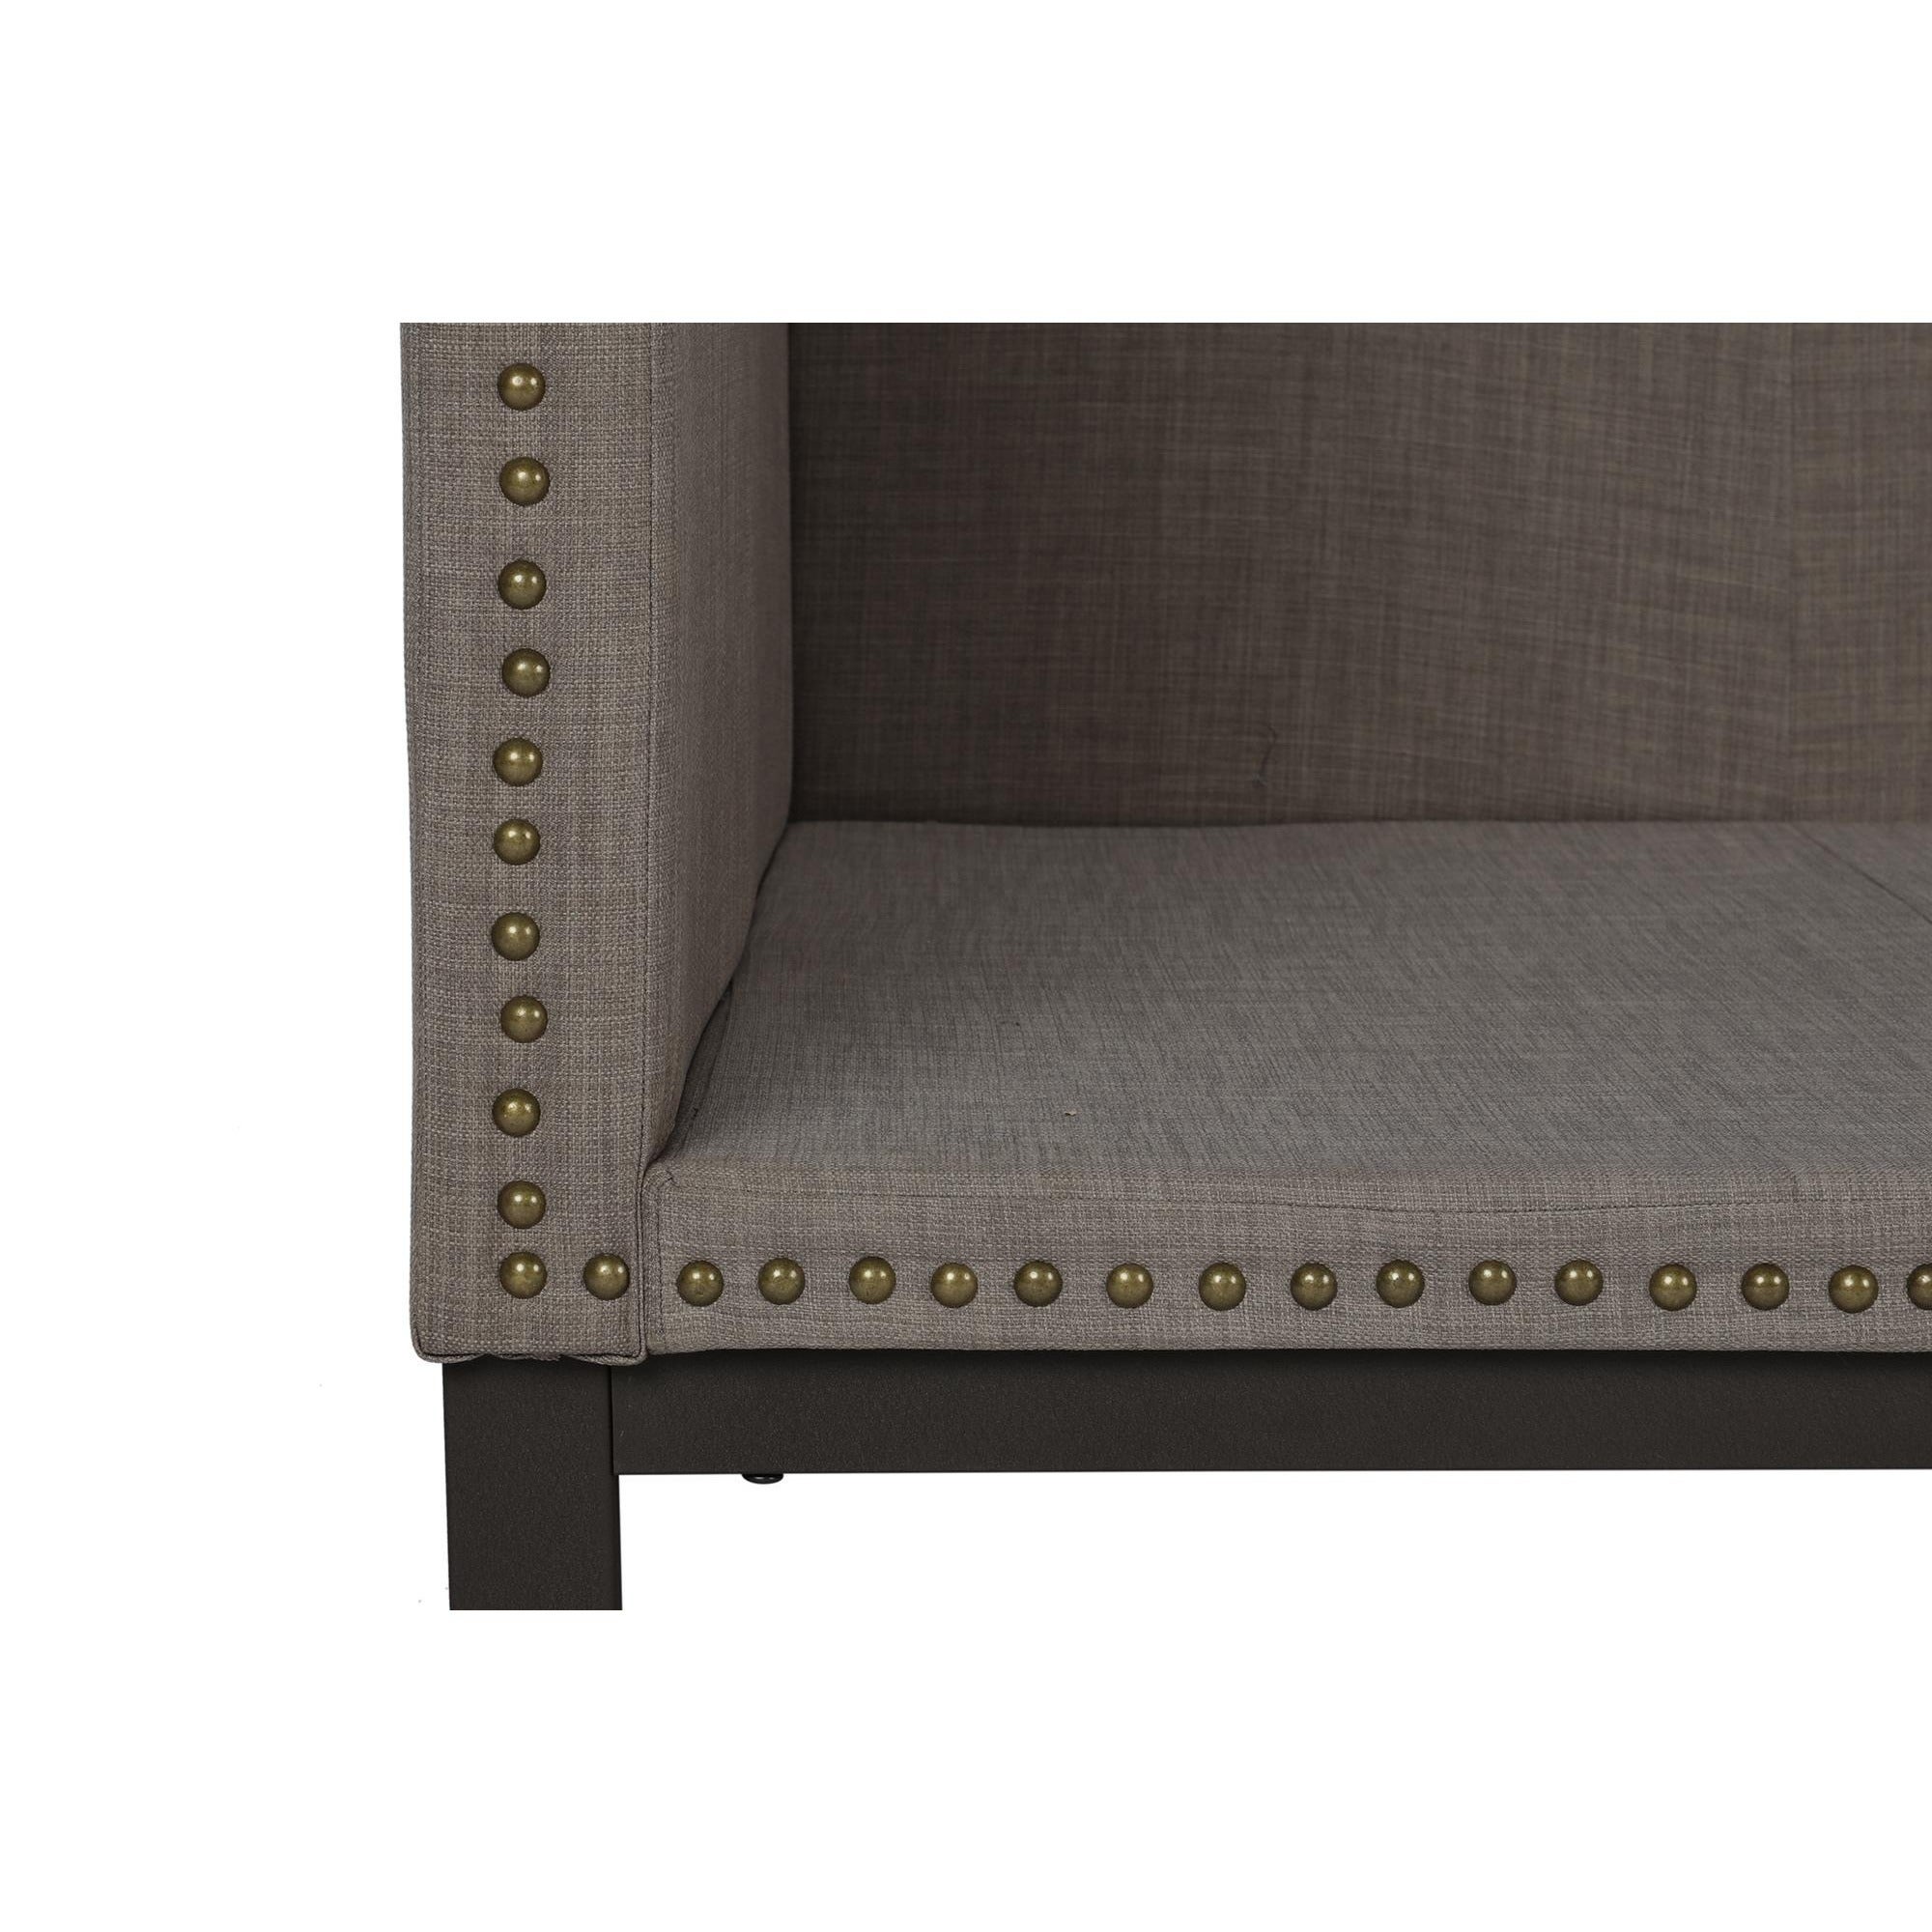 2109 Copper Grove Alty Mid-century Grey Upholstered Modern Daybed 11